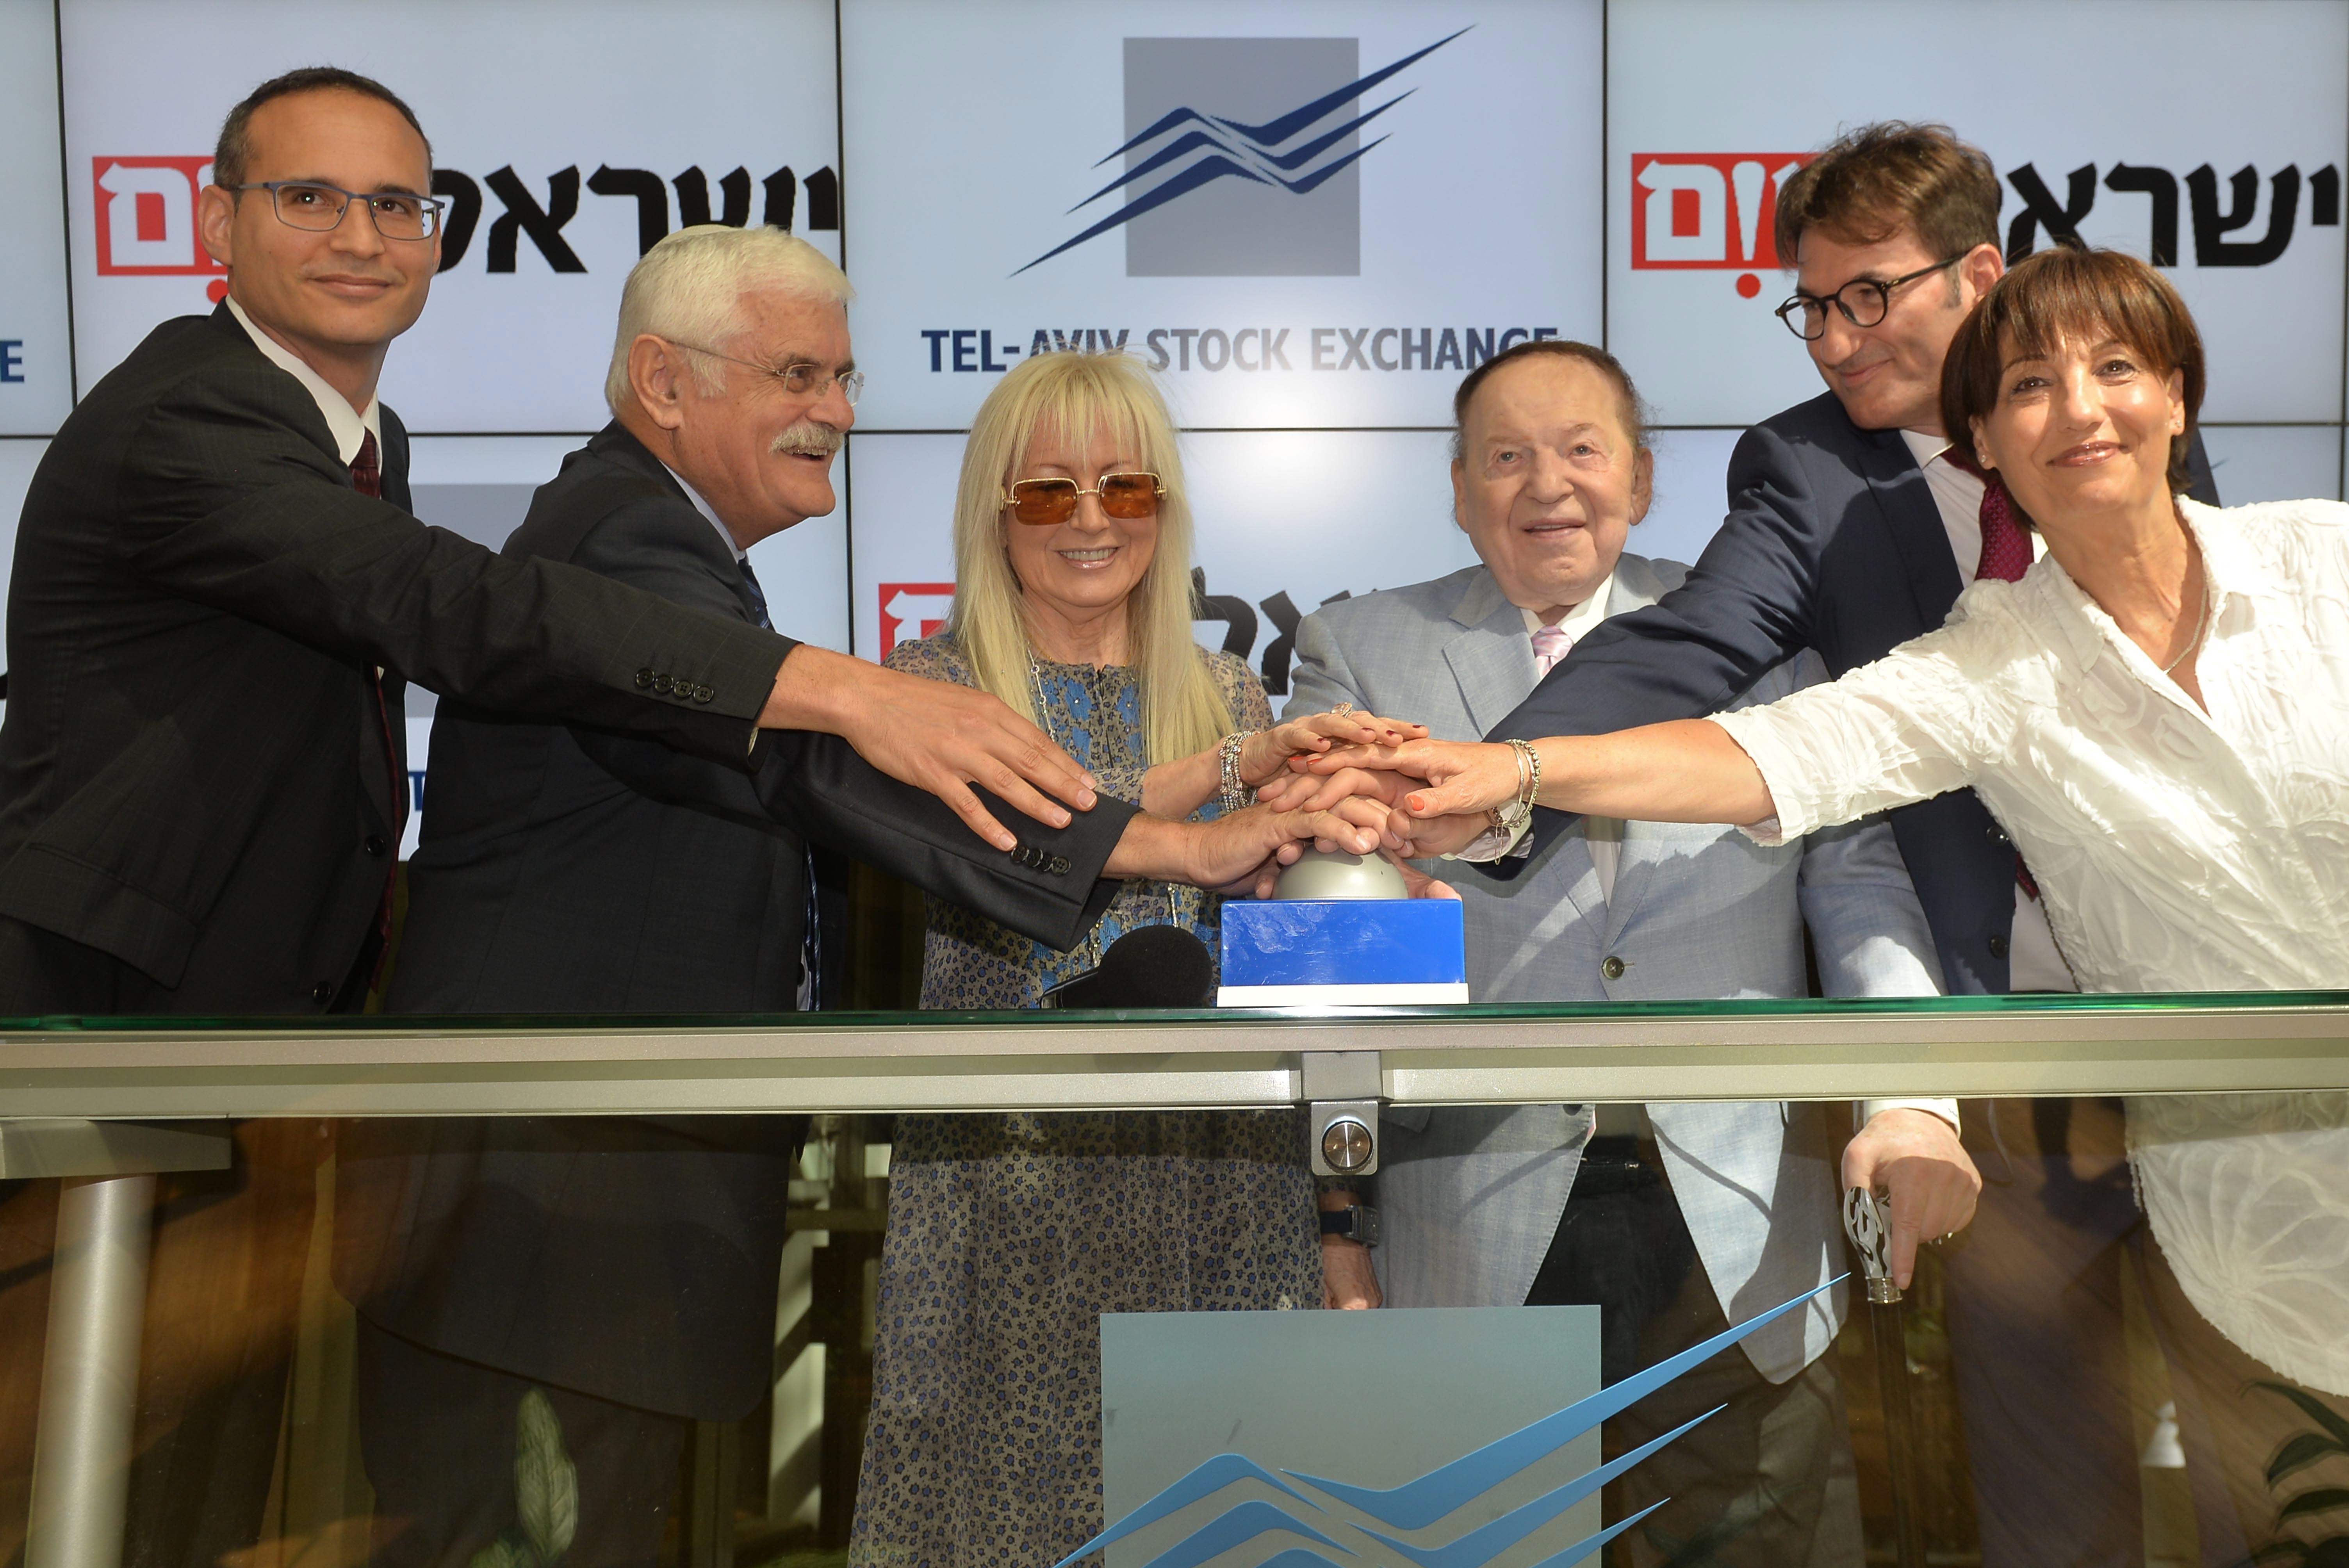 The Management of Israel Today Opened Trading this Morning to mark its 10th anniversary